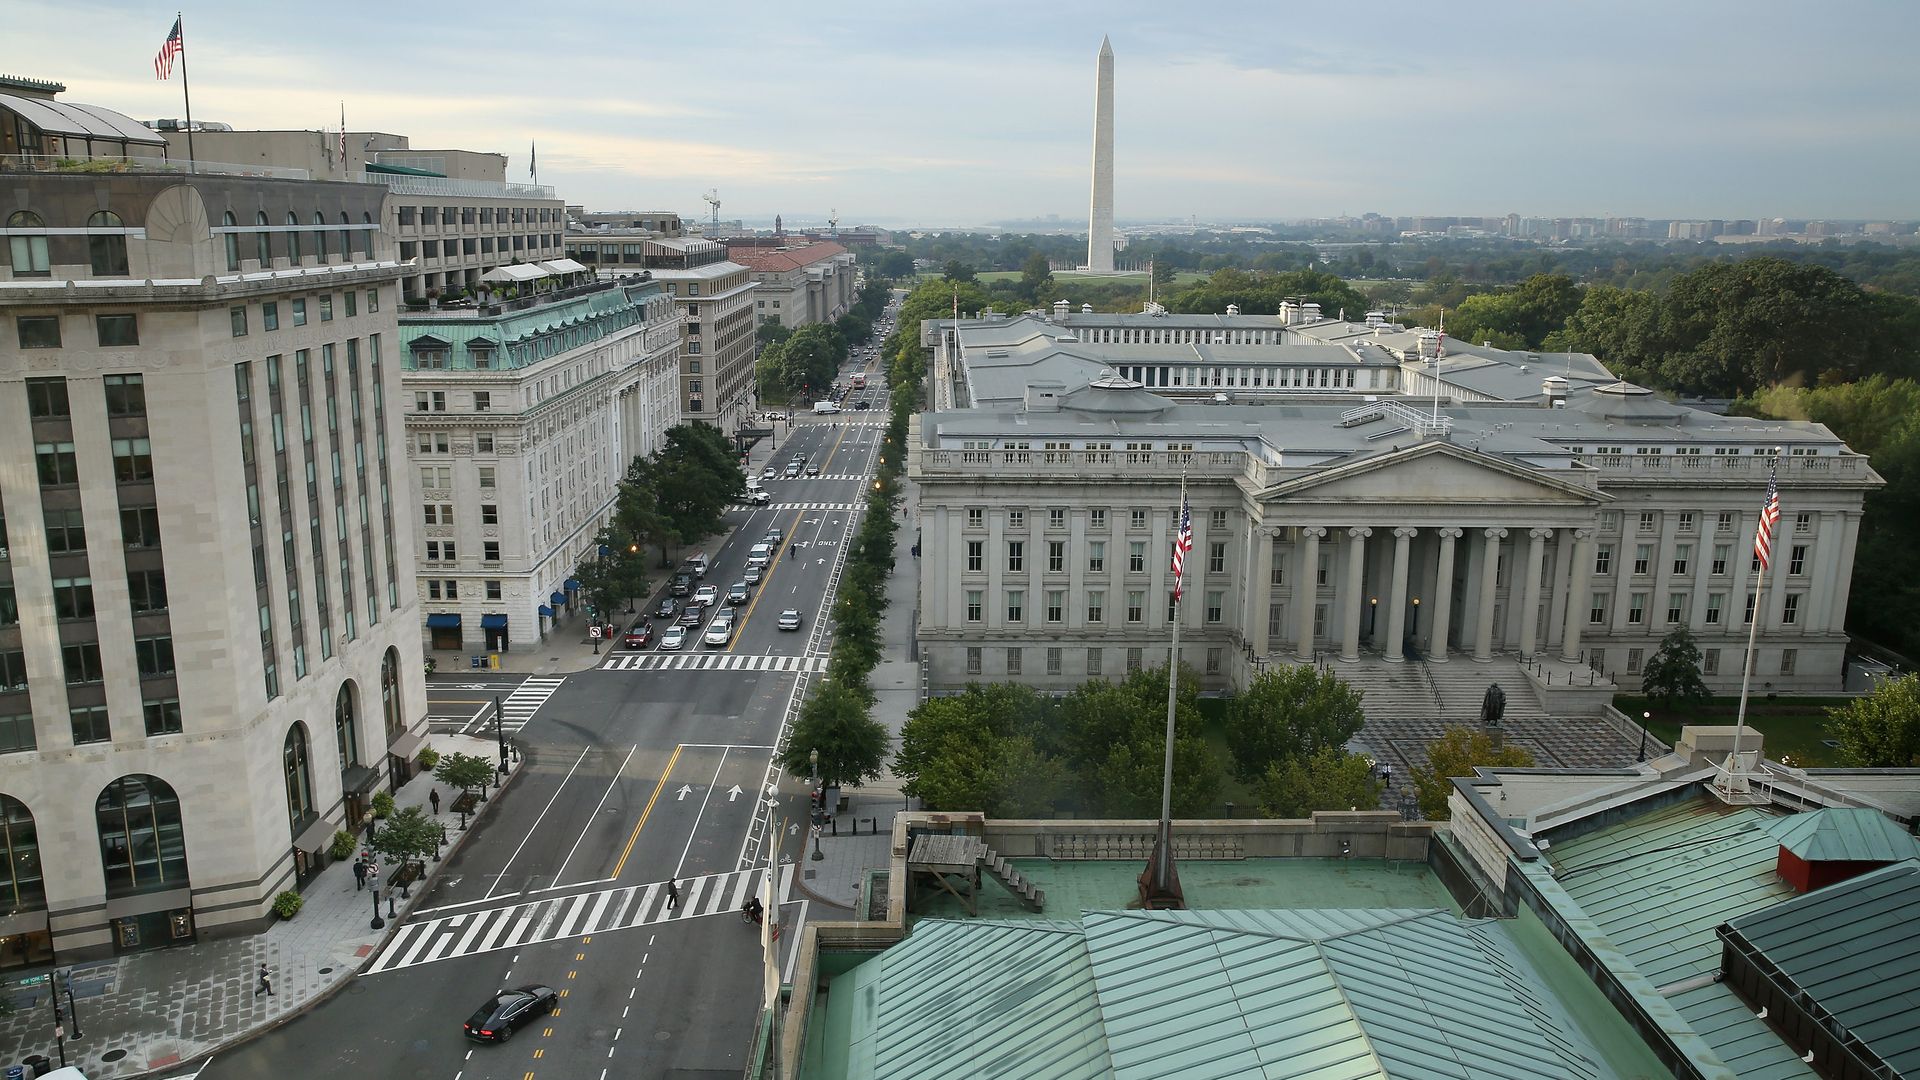 This image is a birds-eye view of the Treasury Building and the street next to it in DC. The Washington monument is seen in the distance.